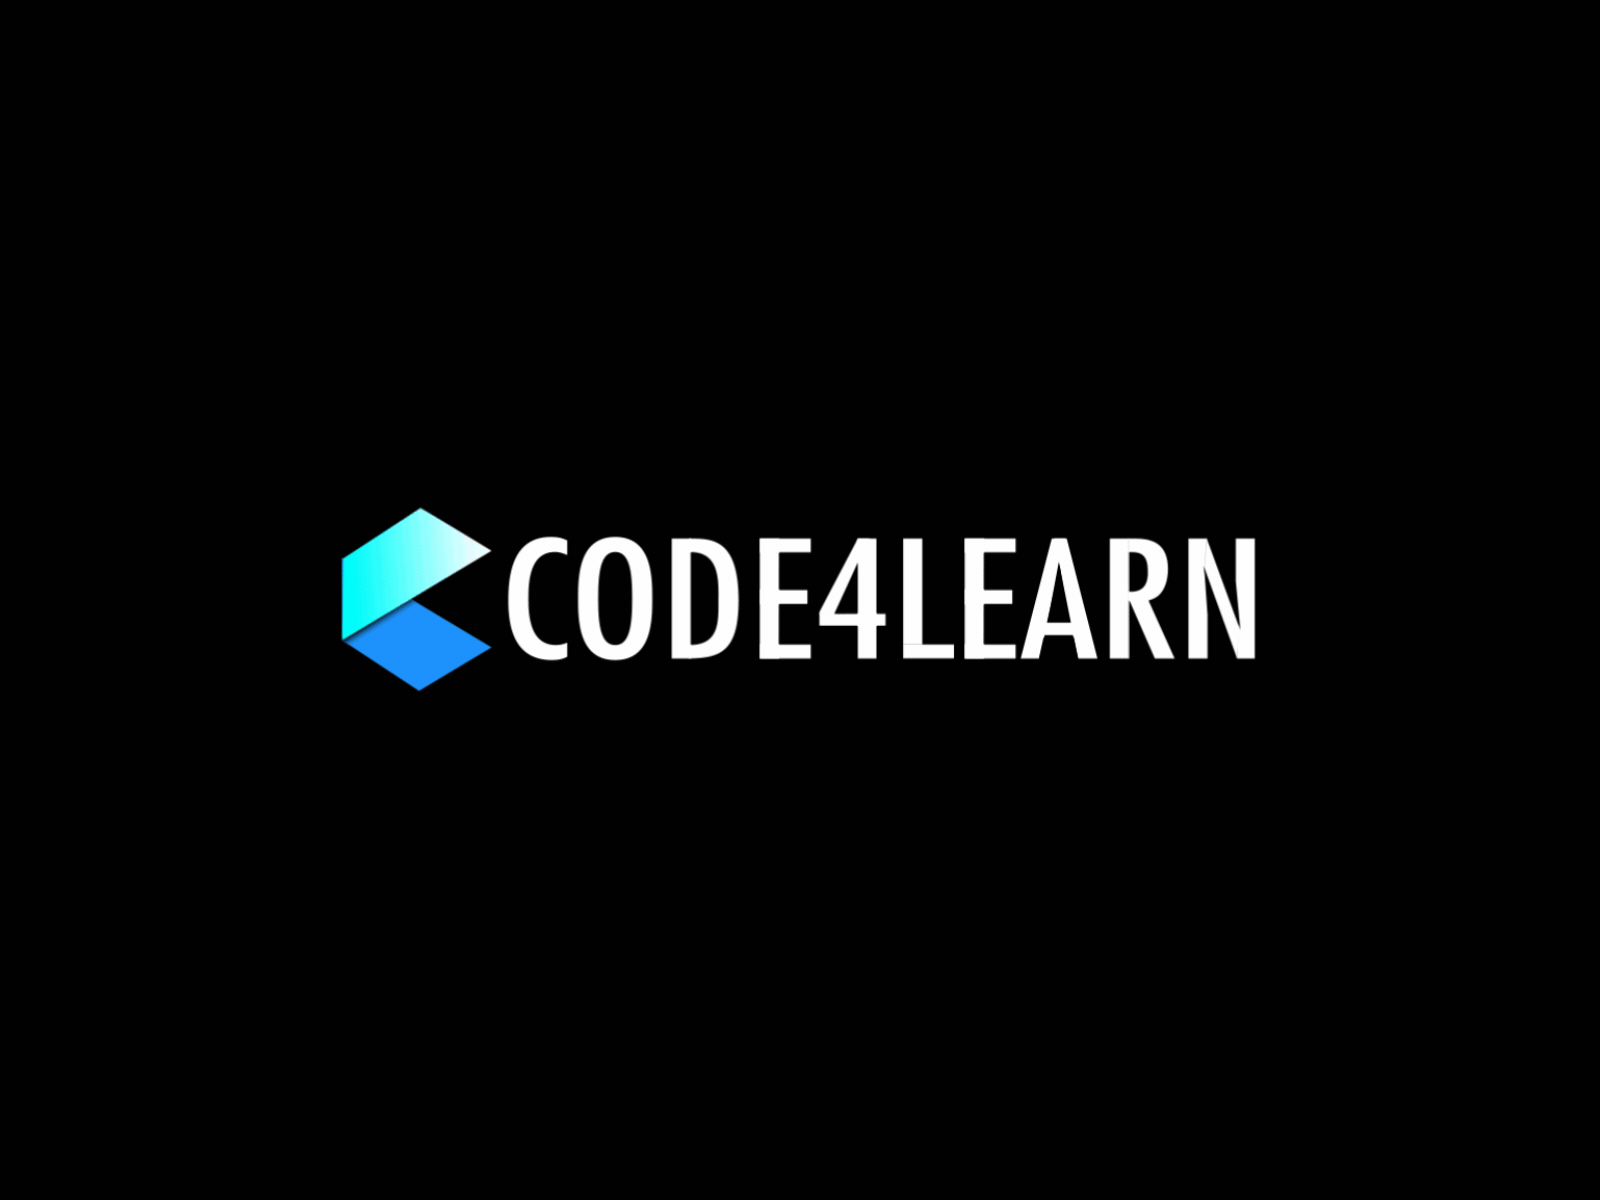 Logo animation for CODE4LEARN